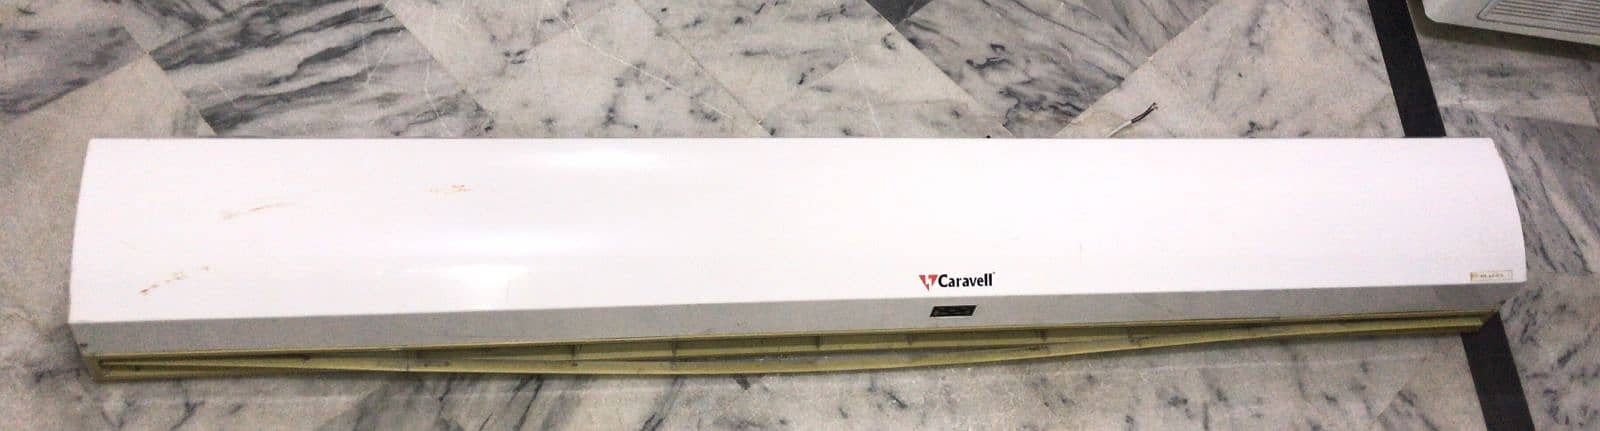 3 Carevell Air Curtain 4 ft (2 piece), 6 ft (1 piece) 0